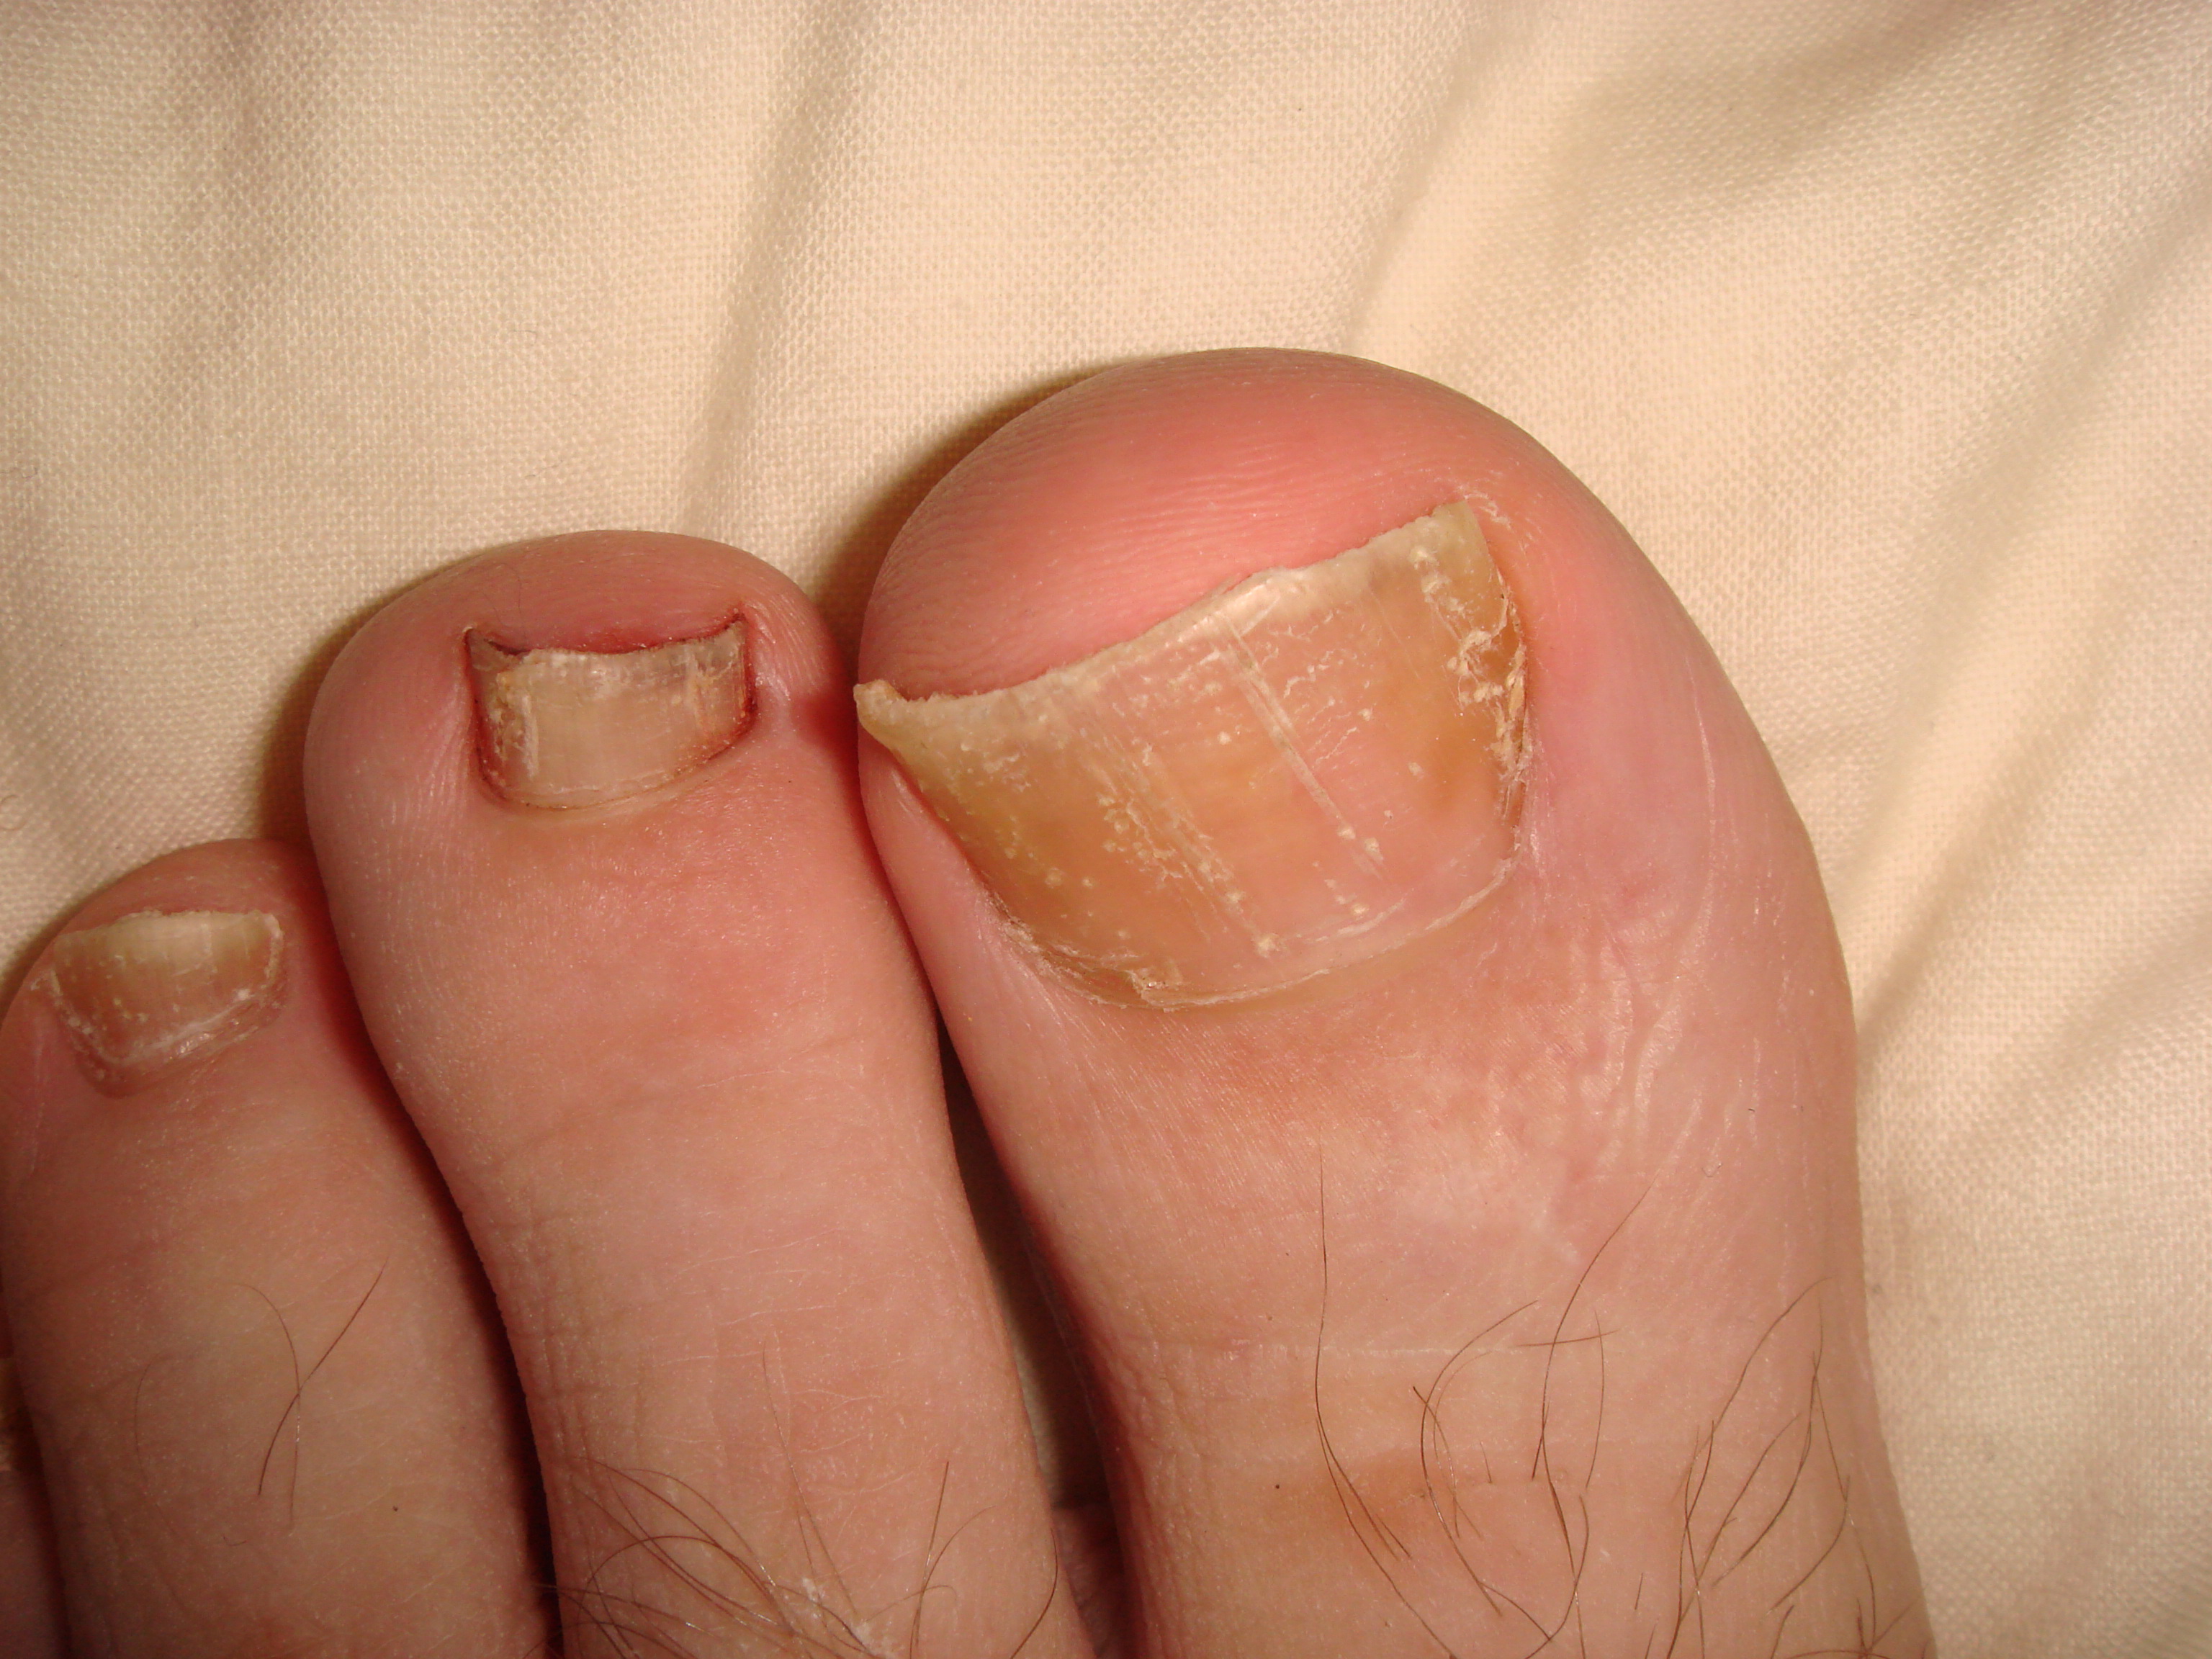 nail psoriasis after pregnancy